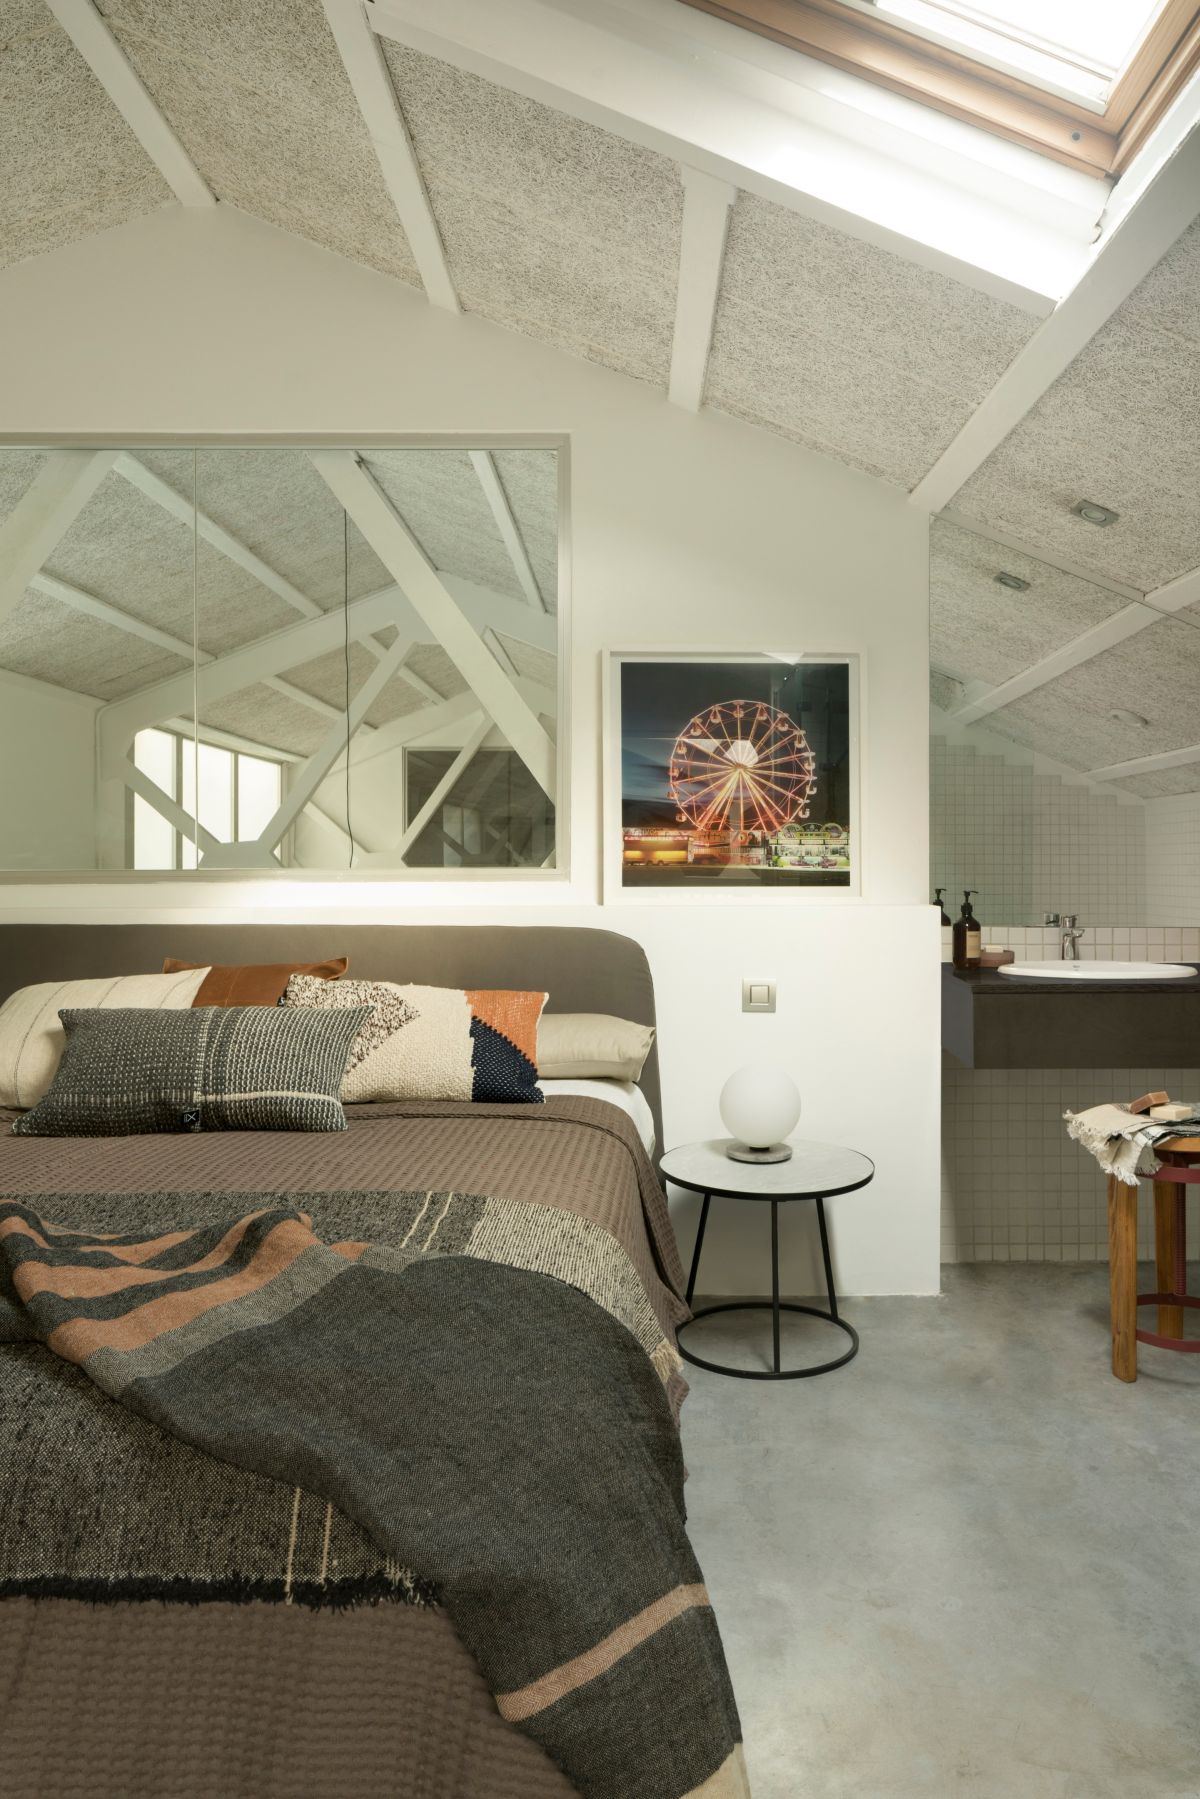 The private areas are extra cozy thanks to the pitched roof and the skylights